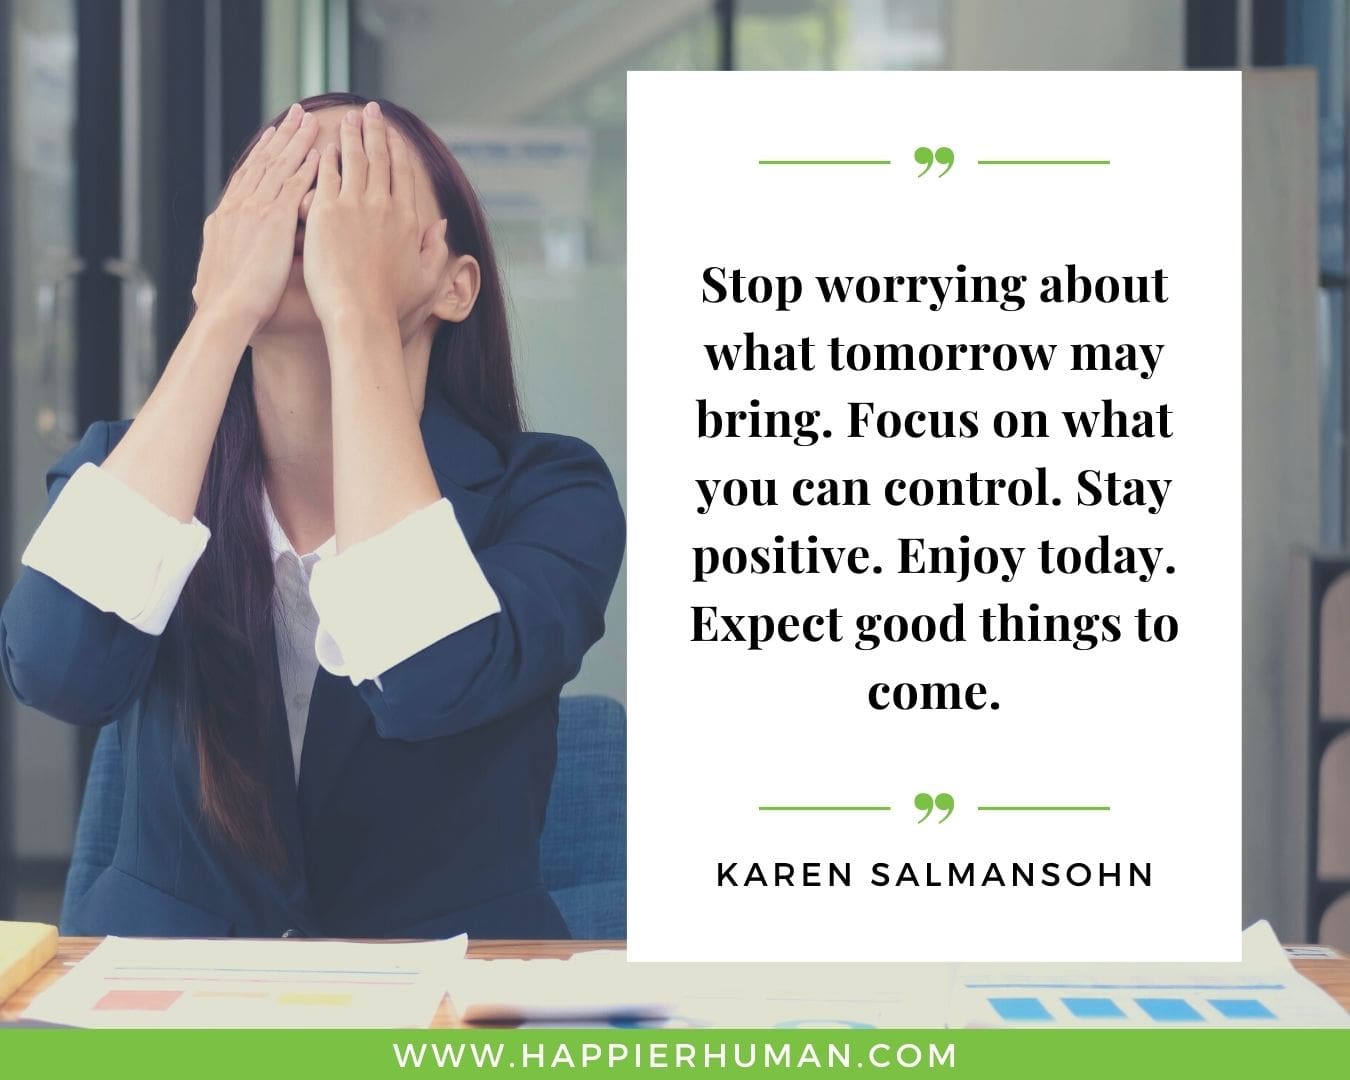 Overthinking Quotes - “Stop worrying about what tomorrow may bring. Focus on what you can control. Stay positive. Enjoy today. Expect good things to come.” - Karen Salmansohn